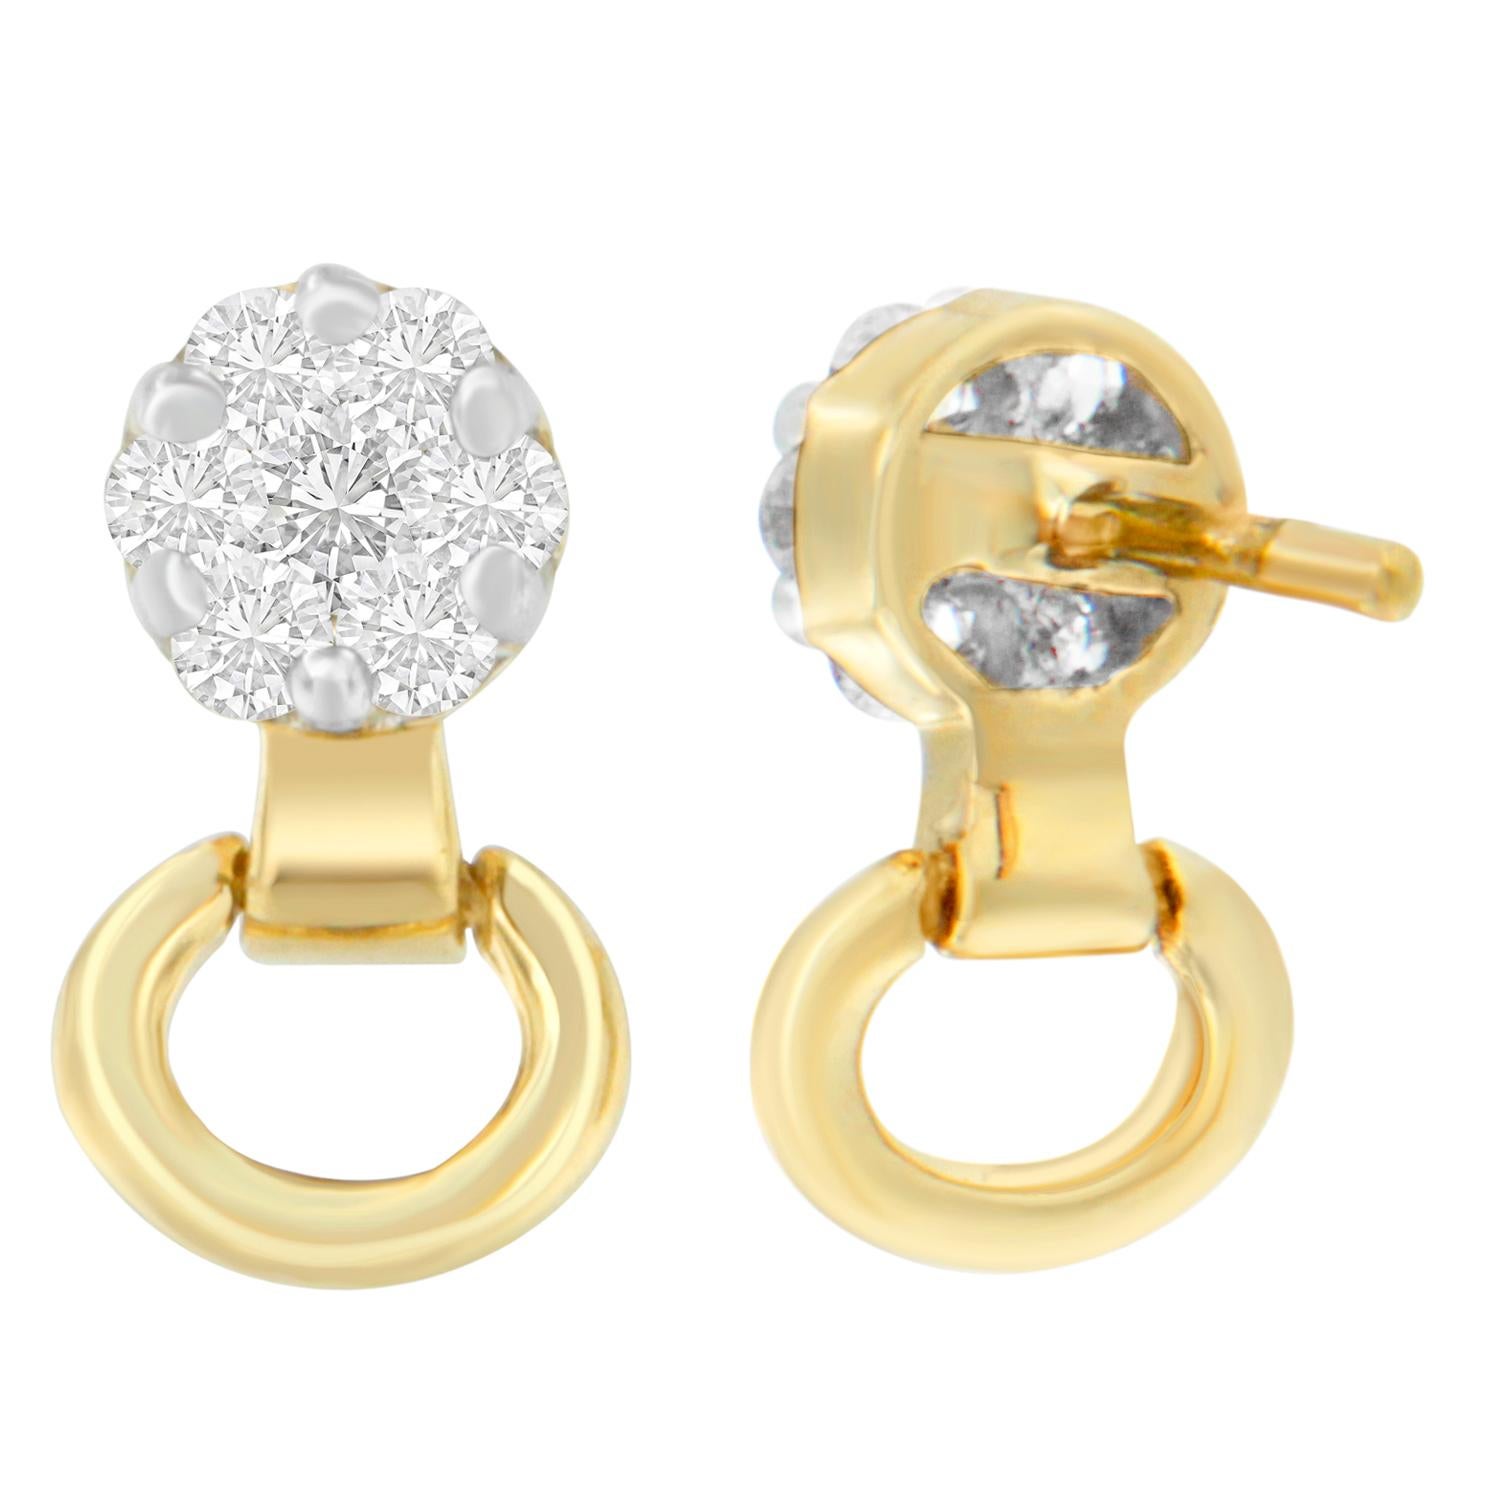 These 14k yellow gold and diamond earrings exude sophistication.  Prong set round-cut diamonds crown a timeless loop design reminiscent of the equestrian set. Polished to a gleam, each earring comes with a push back finding for a secure, custom